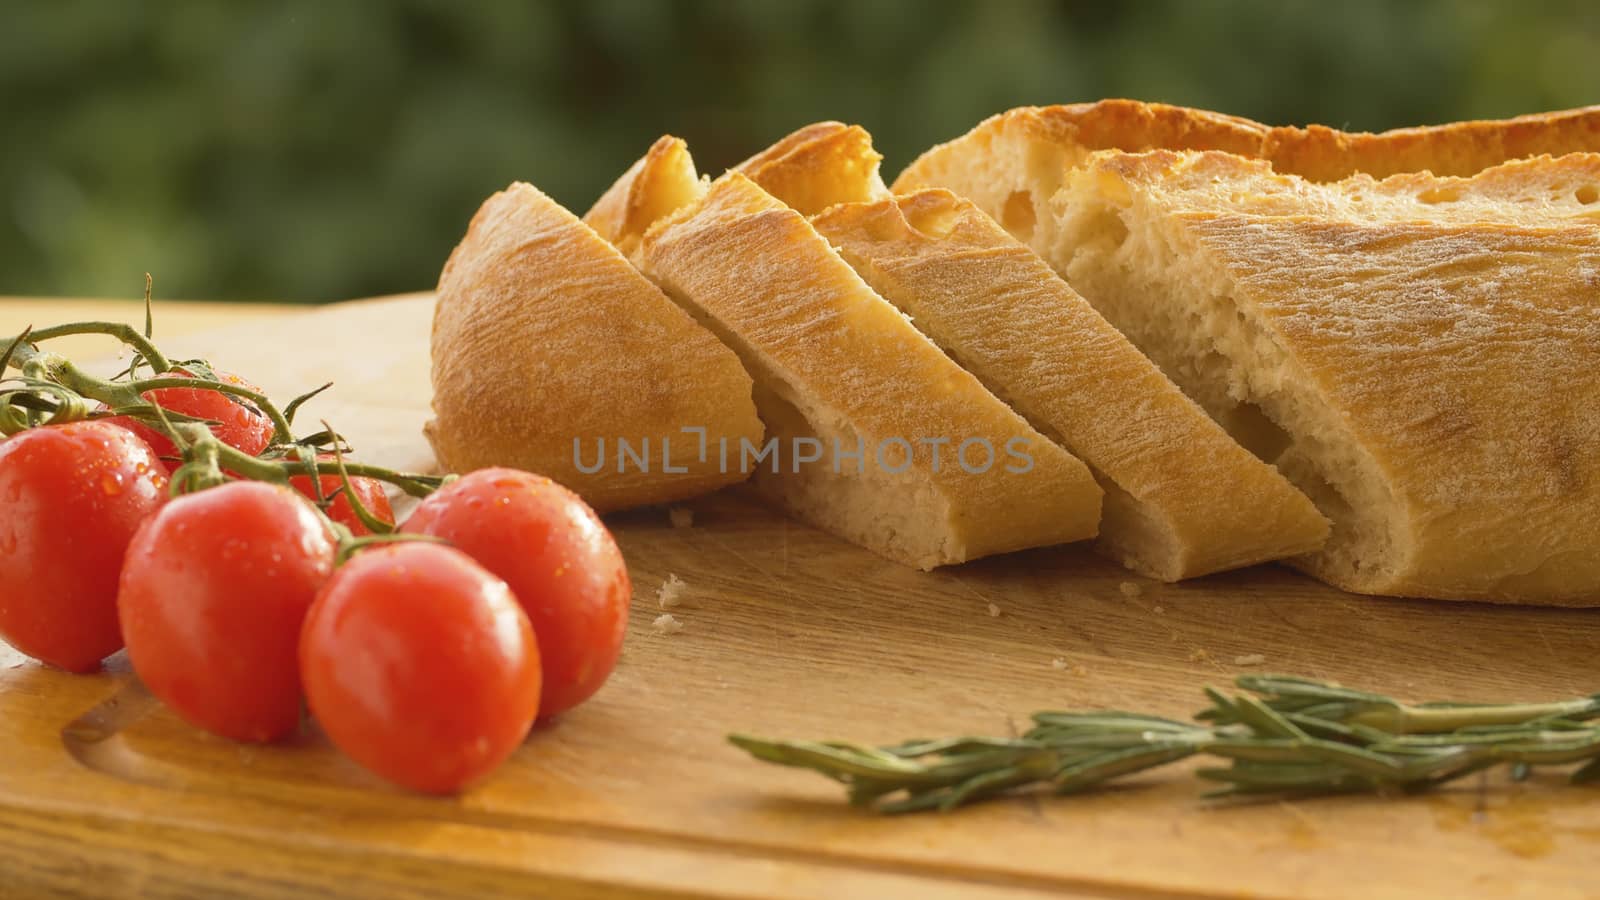 Tomatoes and bread on a cutting board by Alize